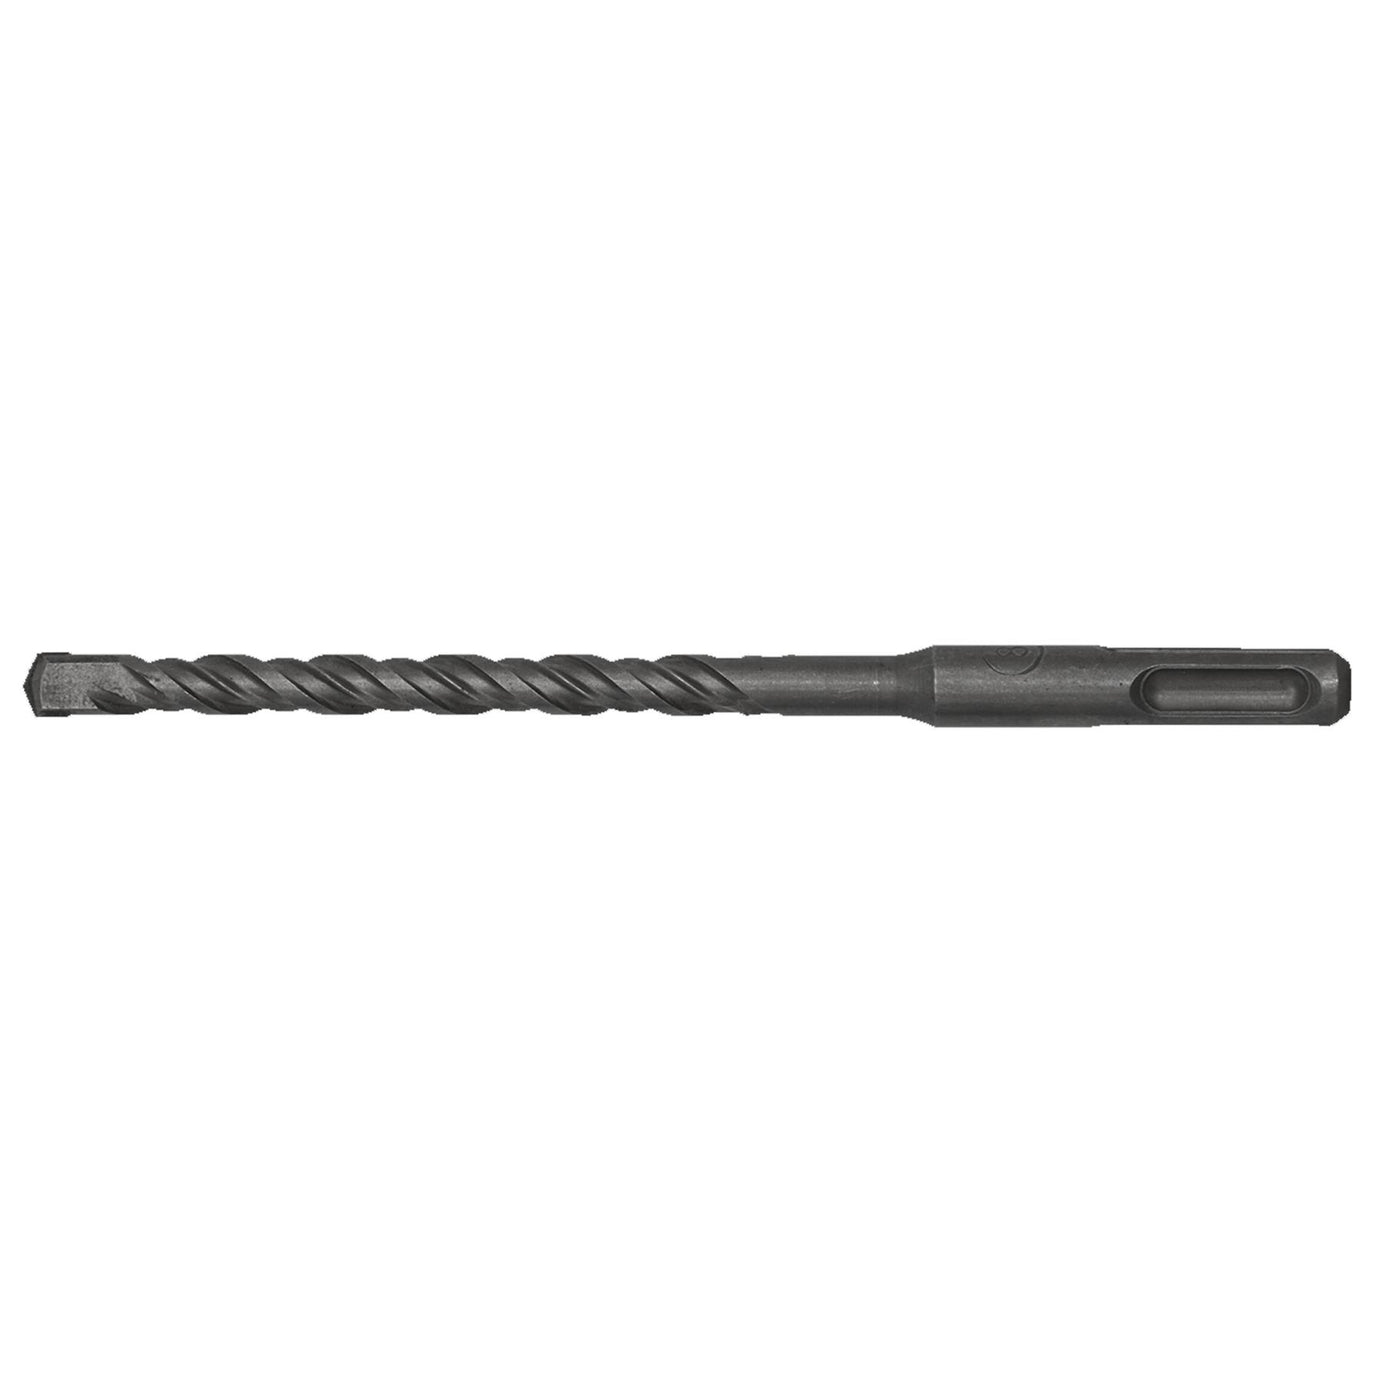 Sealey SDS Plus Drill Bit 8 x 160mm Hardened and ground.